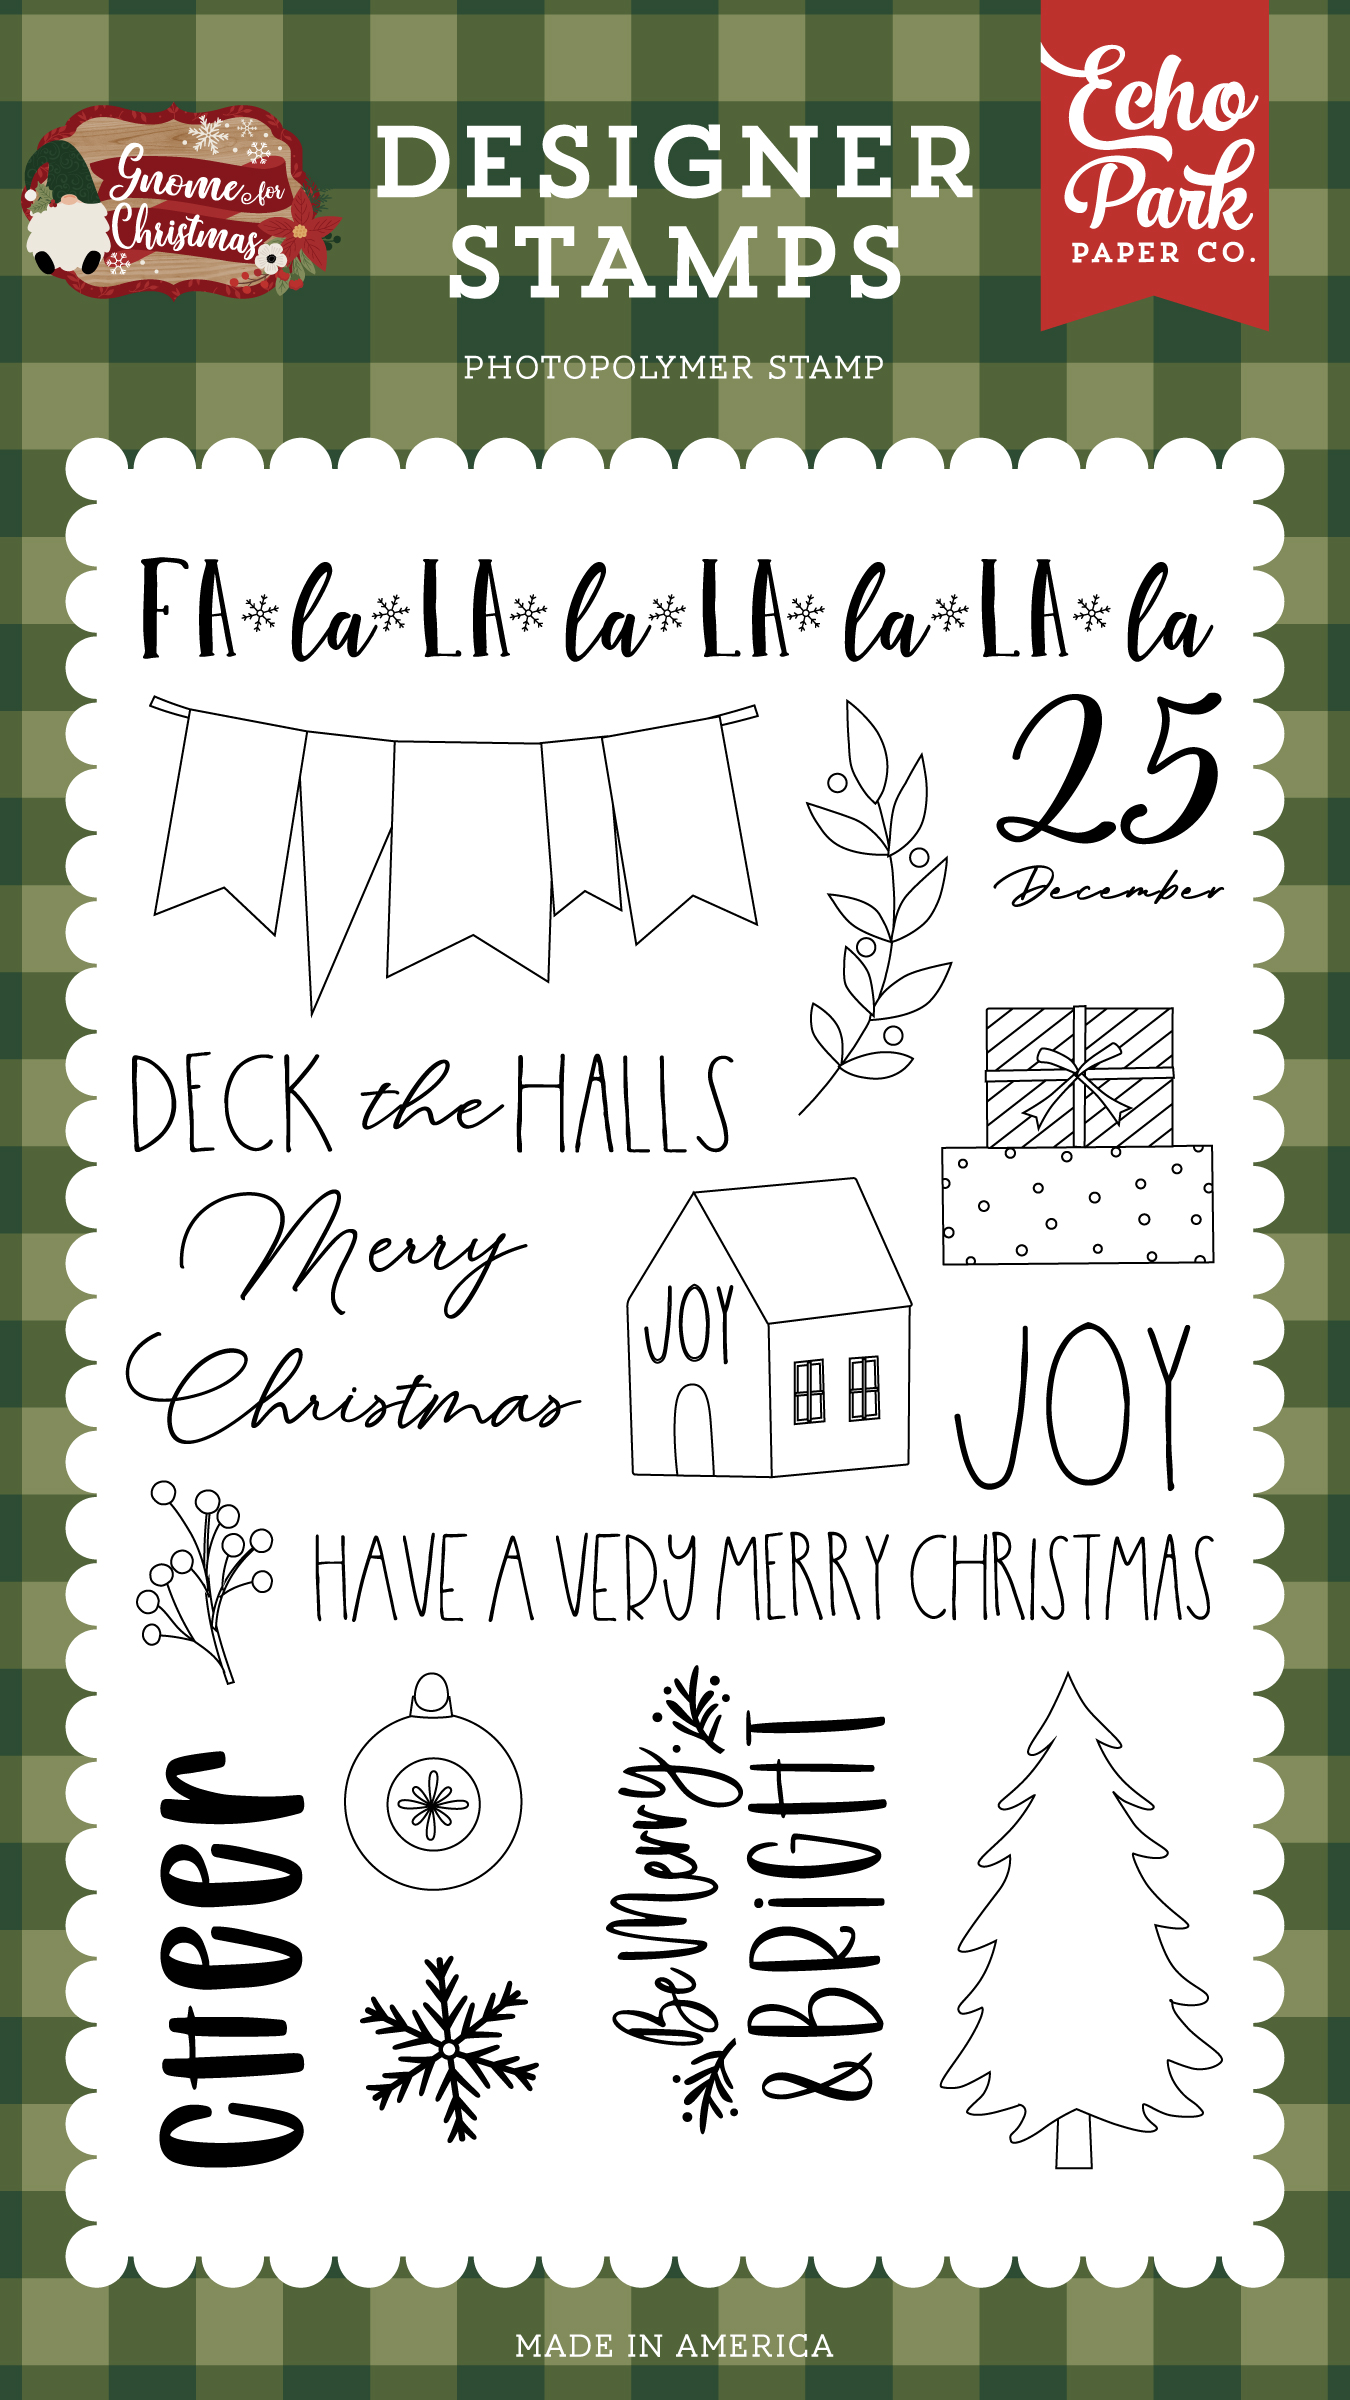 Gnome For Christmas: Cheer Stamp Set - Echo Park Paper Co